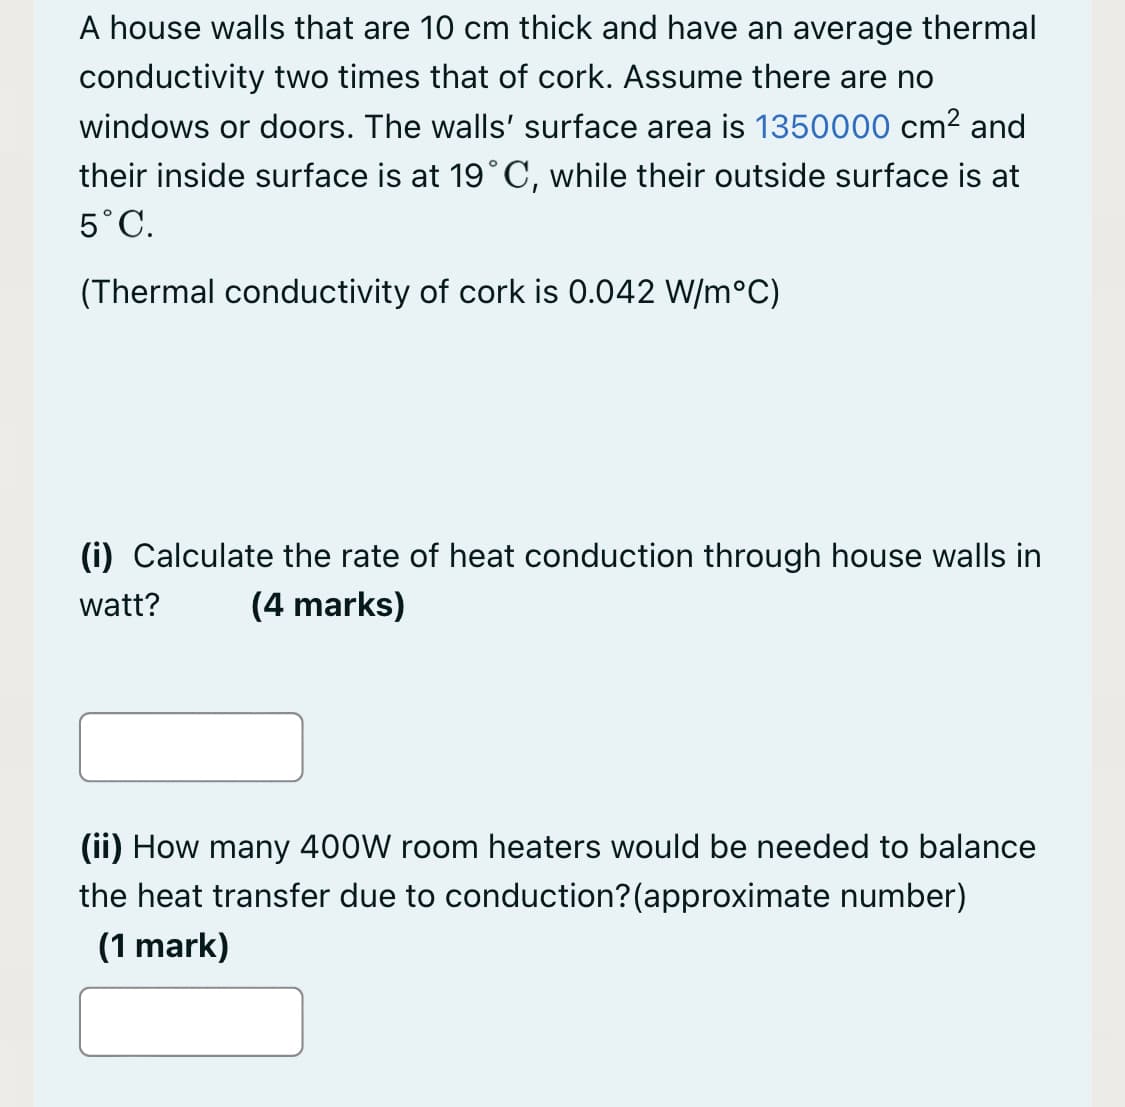 A house walls that are 10 cm thick and have an average thermal
conductivity two times that of cork. Assume there are no
windows or doors. The walls' surface area is 1350000 cm? and
their inside surface is at 19°C, while their outside surface is at
5°C.
(Thermal conductivity of cork is 0.042 W/m°C)
(i) Calculate the rate of heat conduction through house walls in
watt?
(4 marks)
(ii) How many 400W room heaters would be needed to balance
the heat transfer due to conduction?(approximate number)
(1 mark)
